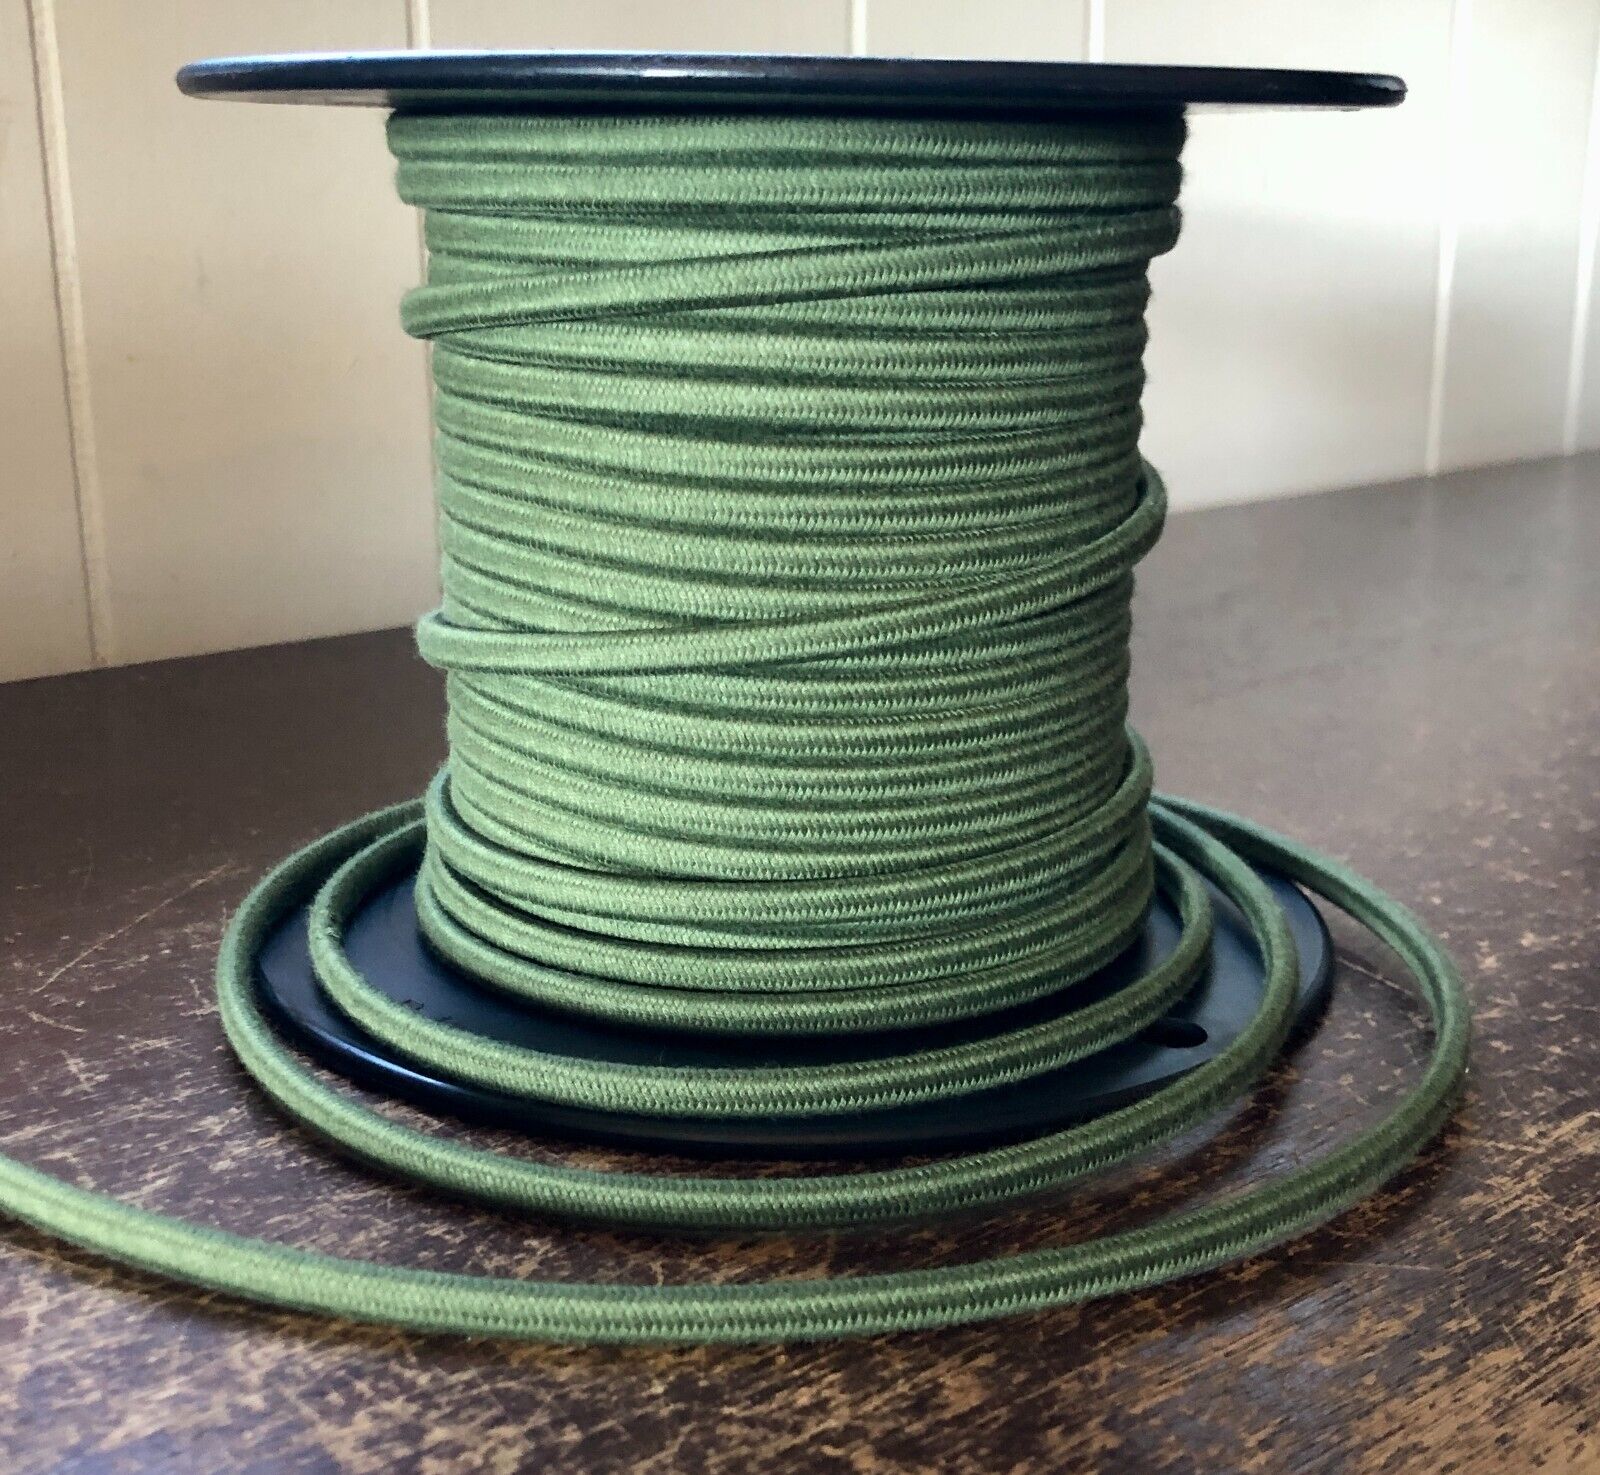 Green 2-Wire Cloth Covered Cord, 18ga Vintage Style Lamps Antique Lights, Cotton